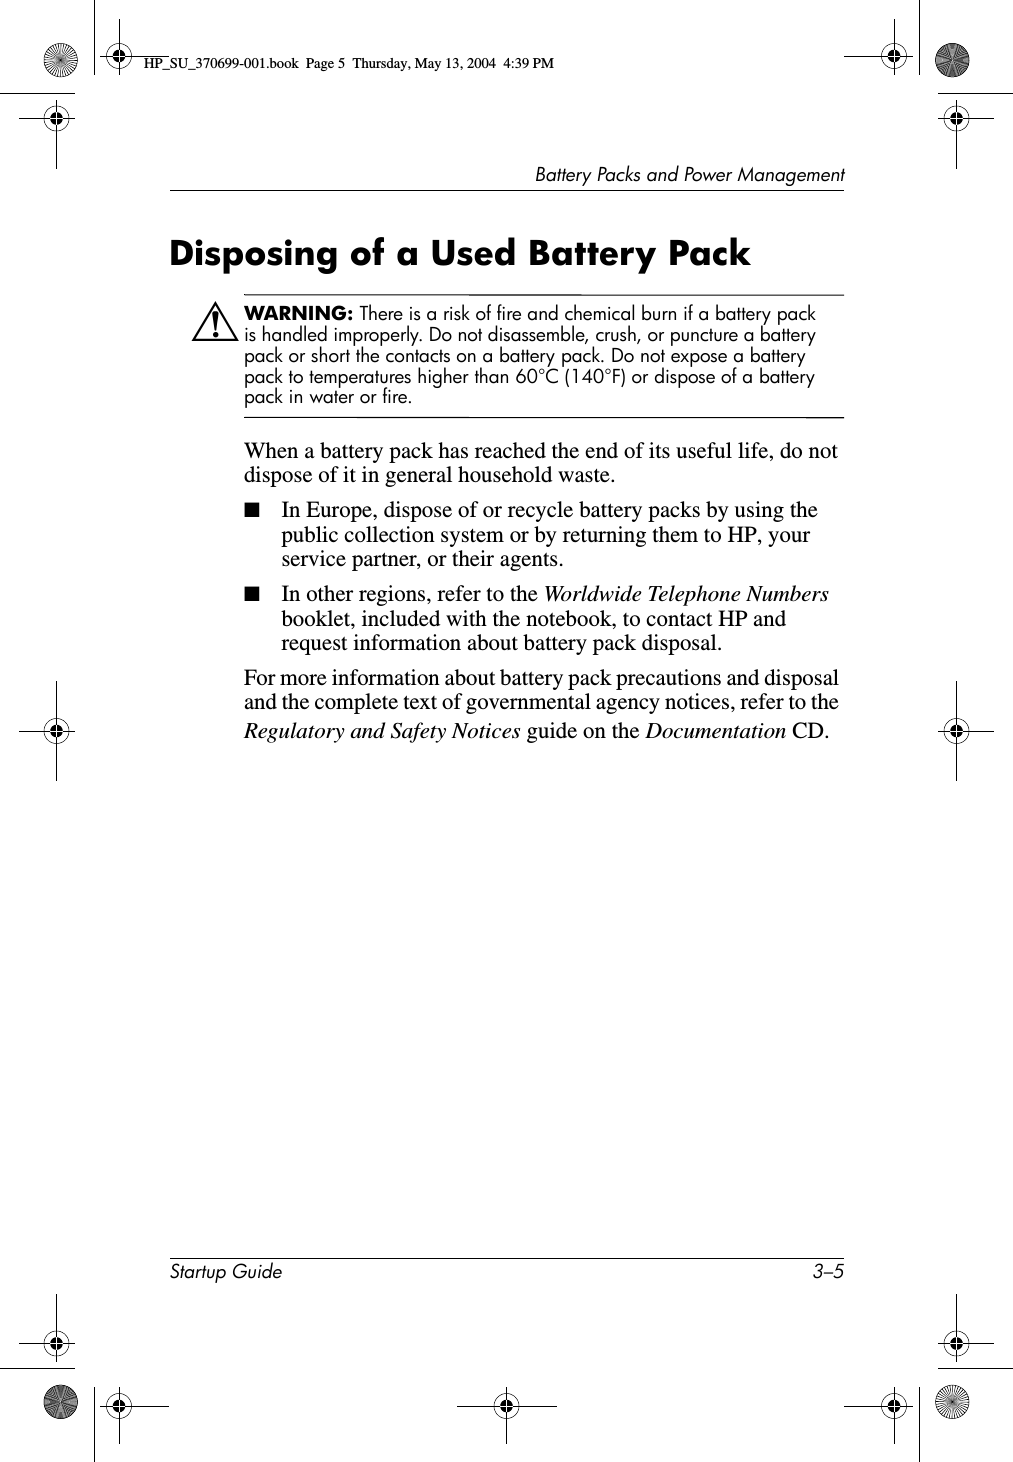 Battery Packs and Power ManagementStartup Guide 3–5Disposing of a Used Battery PackÅWARNING: There is a risk of fire and chemical burn if a battery pack is handled improperly. Do not disassemble, crush, or puncture a battery pack or short the contacts on a battery pack. Do not expose a battery pack to temperatures higher than 60°C (140°F) or dispose of a battery pack in water or fire.When a battery pack has reached the end of its useful life, do not dispose of it in general household waste.■In Europe, dispose of or recycle battery packs by using the public collection system or by returning them to HP, your service partner, or their agents.■In other regions, refer to the Worldwide Telephone Numbers booklet, included with the notebook, to contact HP and request information about battery pack disposal.For more information about battery pack precautions and disposal and the complete text of governmental agency notices, refer to the Regulatory and Safety Notices guide on the Documentation CD.HP_SU_370699-001.book  Page 5  Thursday, May 13, 2004  4:39 PM